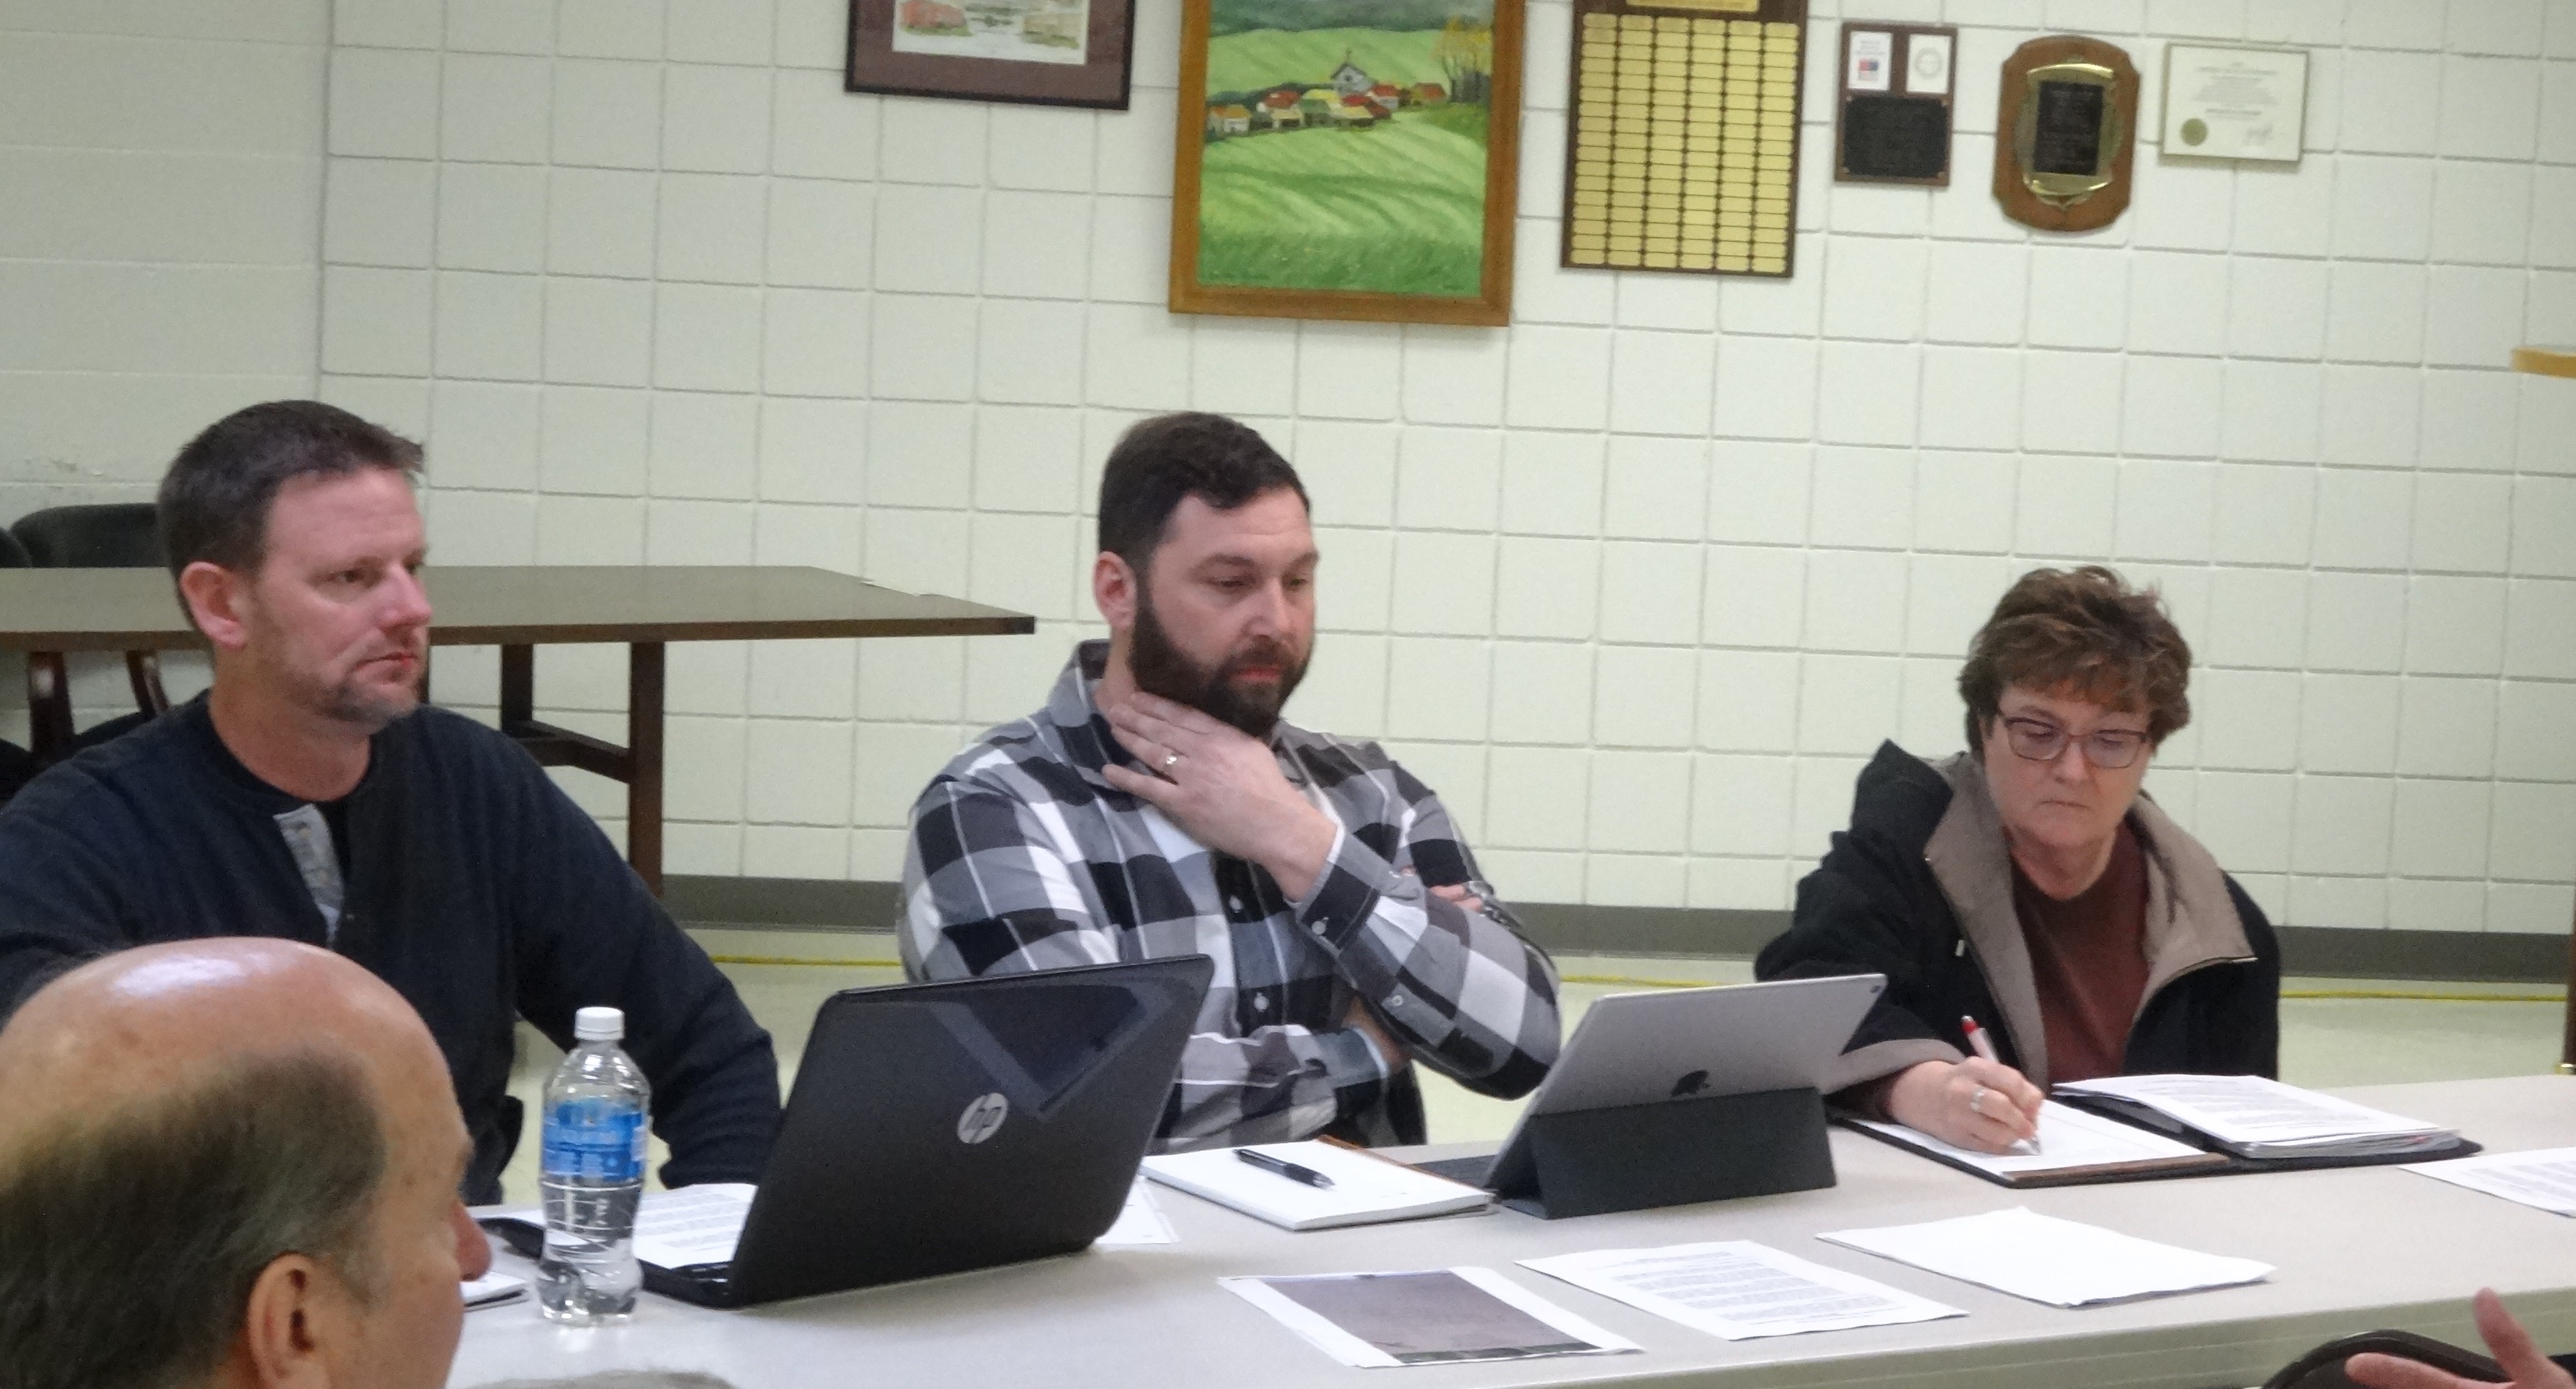 Mike Schiska, left, and Dave DeJoy of Brookfield Youth Baseball and Softball Inc. and Judy Radachy of Trumbull County Adaptive Baseball are shown at a meeting with Brookfield trustees.